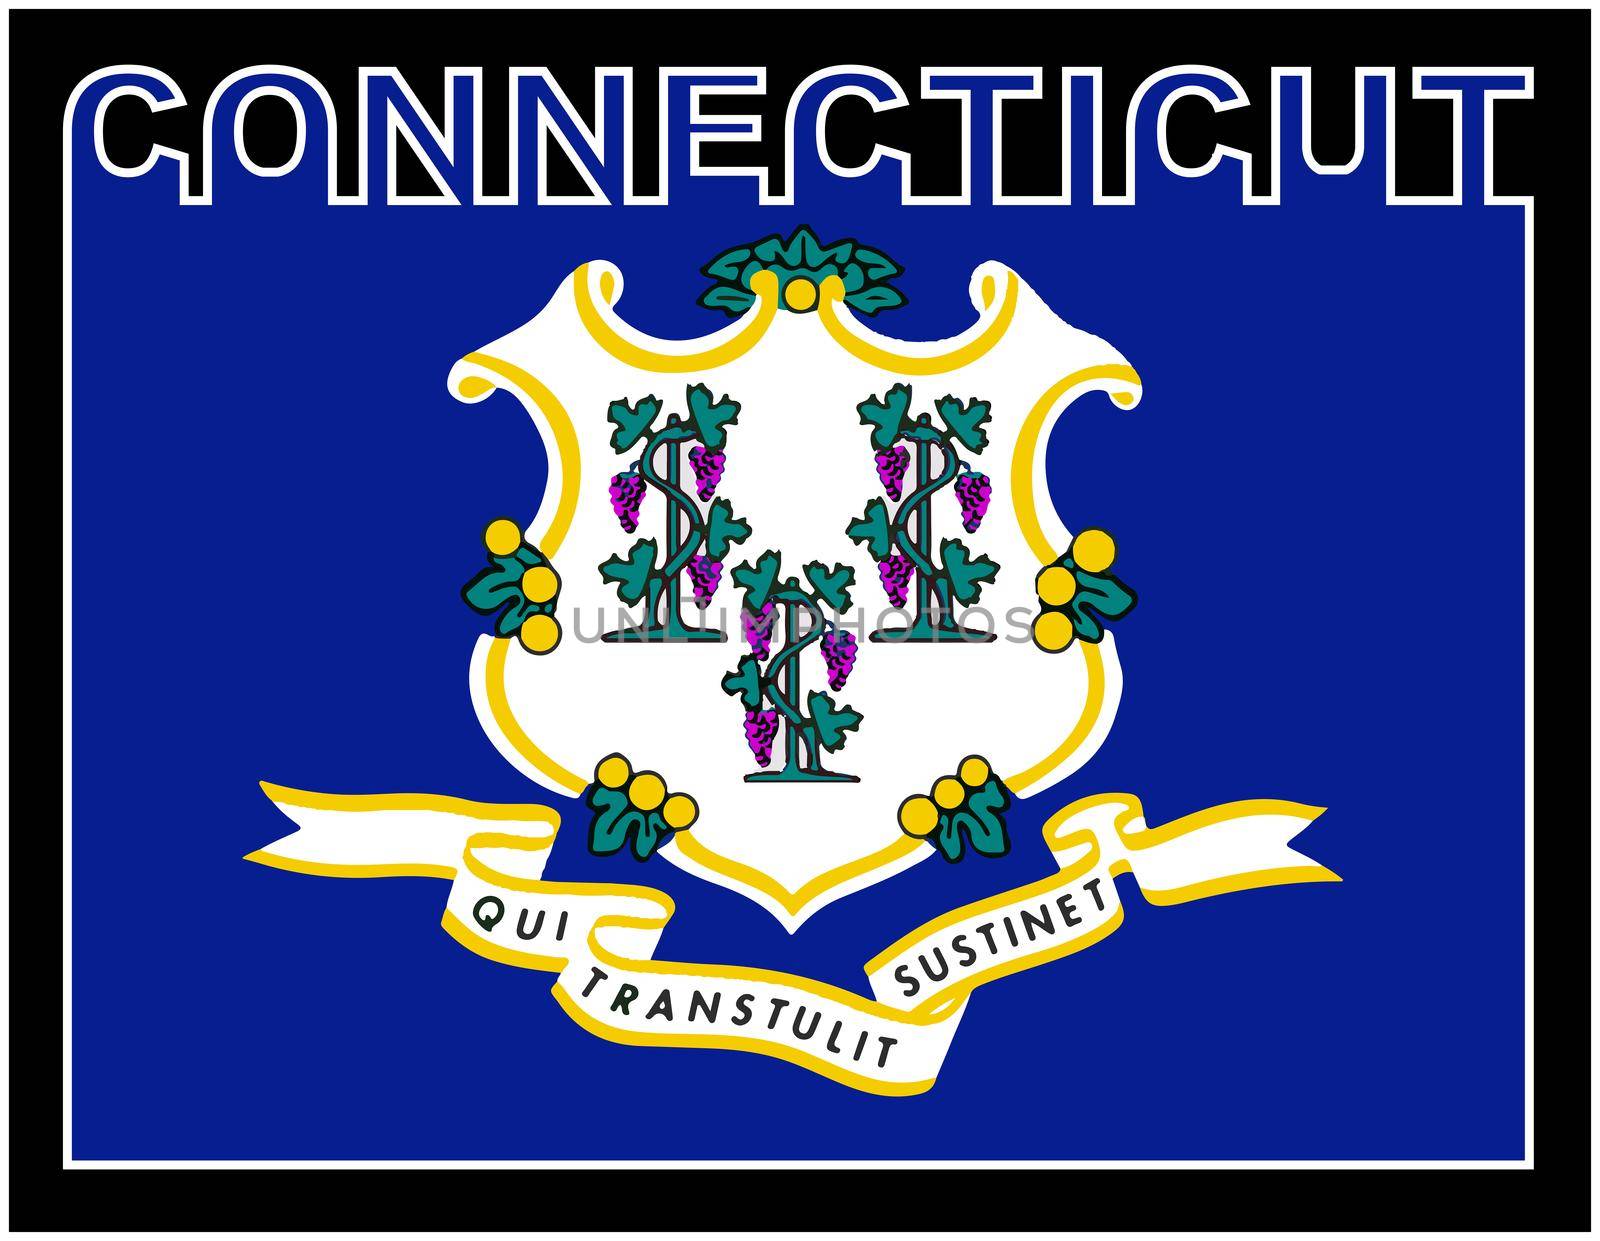 Connecticut state text in silhouette set over the state flag